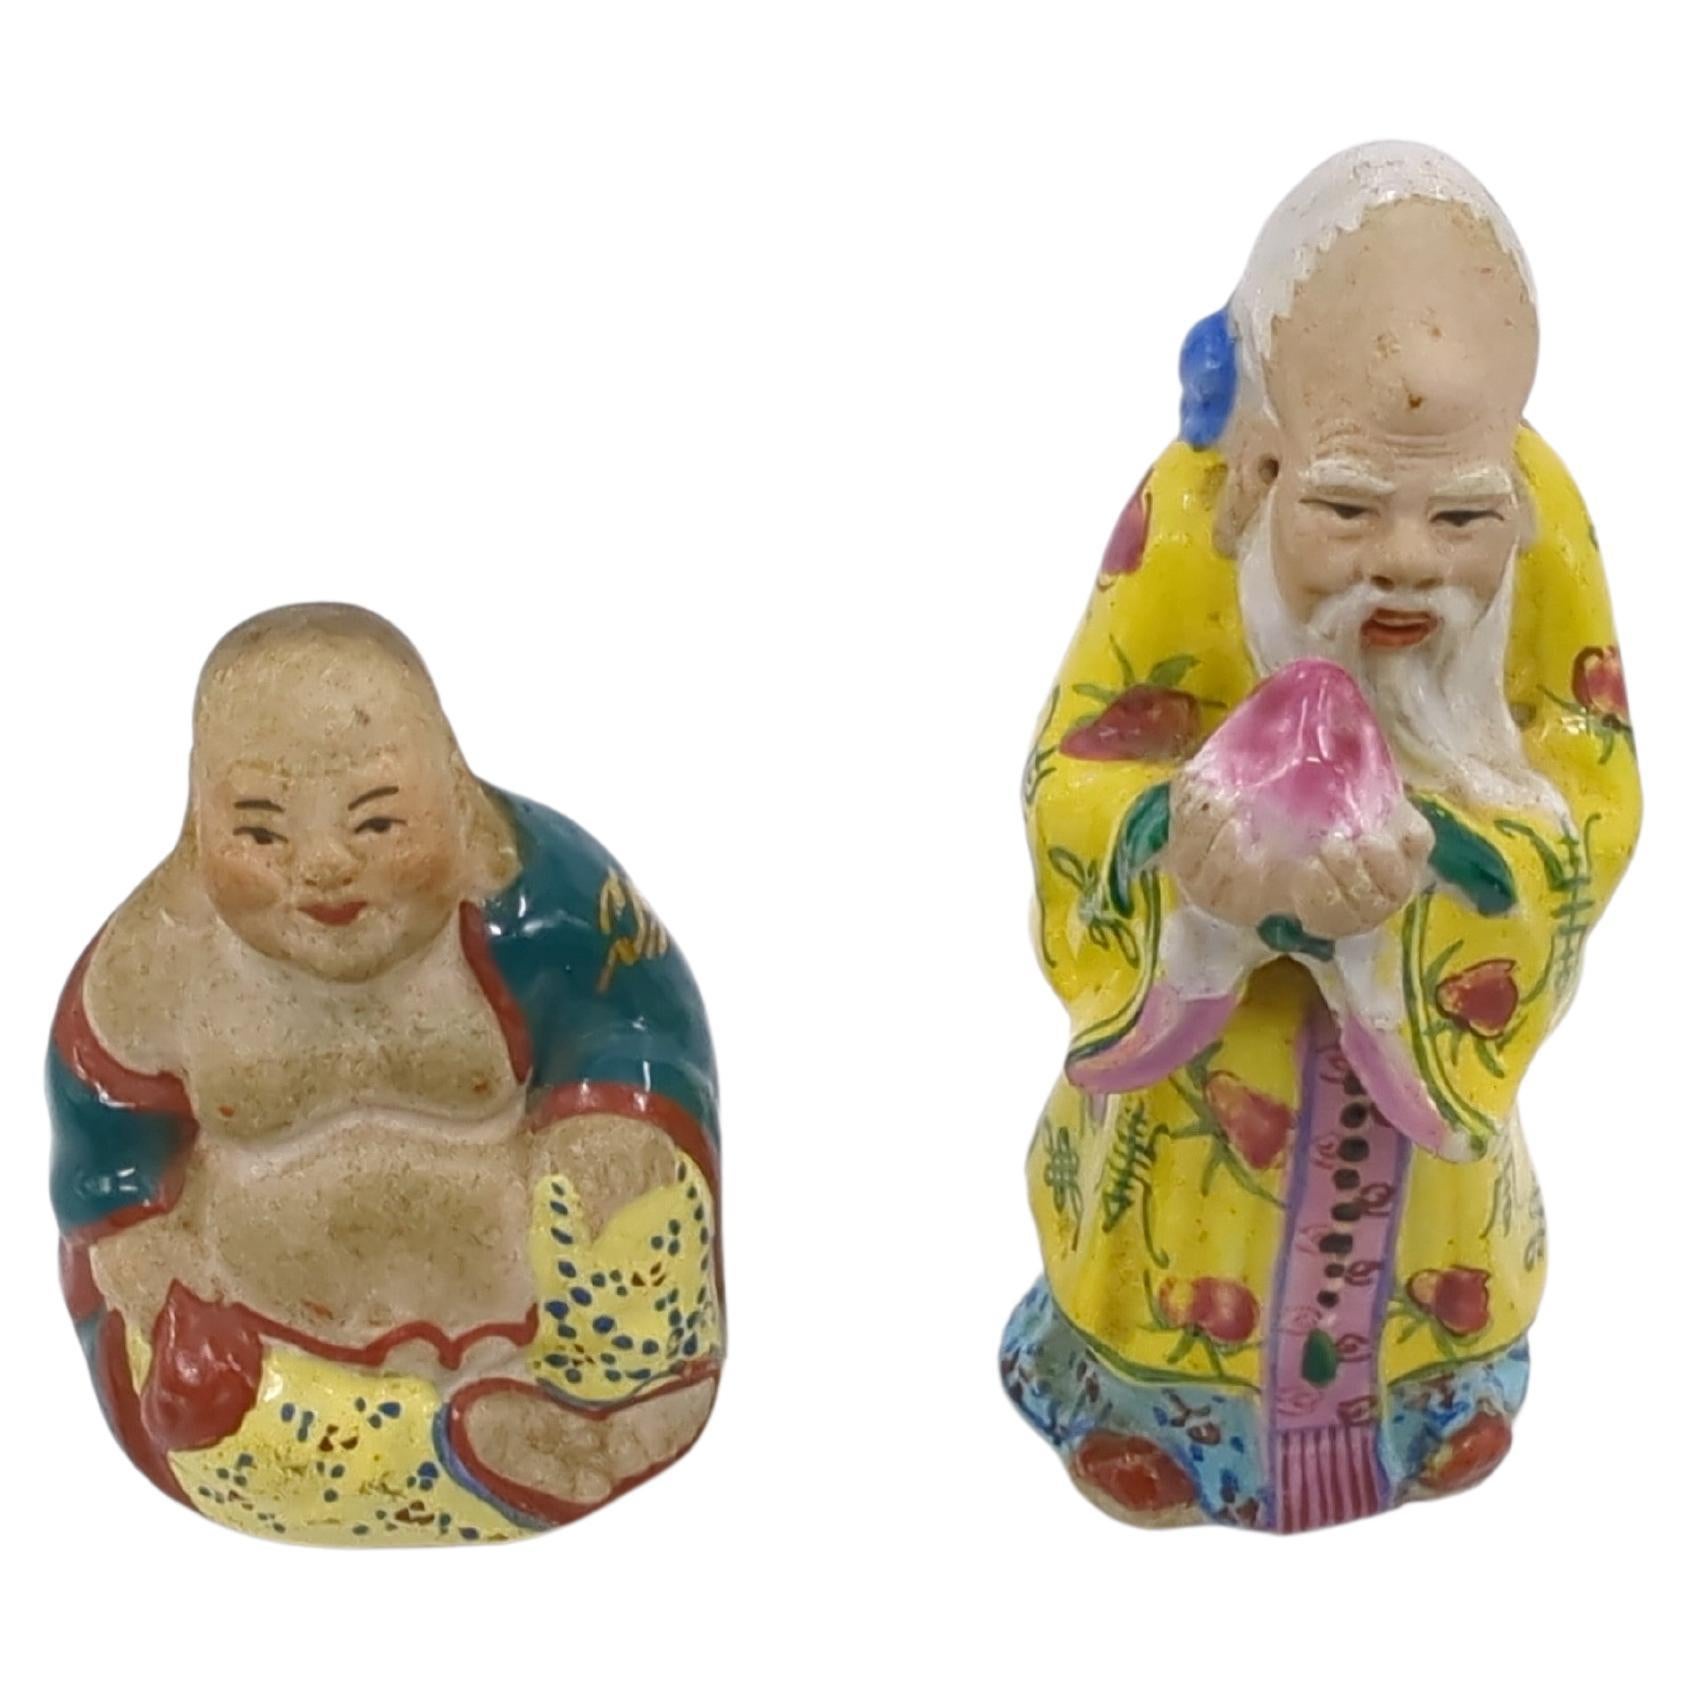 Two small vintage Chinese famille rose porcelain figures of (1) a sitting Budai (or Hotai) Buddha and (2) a standing God of Longevity presenting a large peach

Size H: 3.25